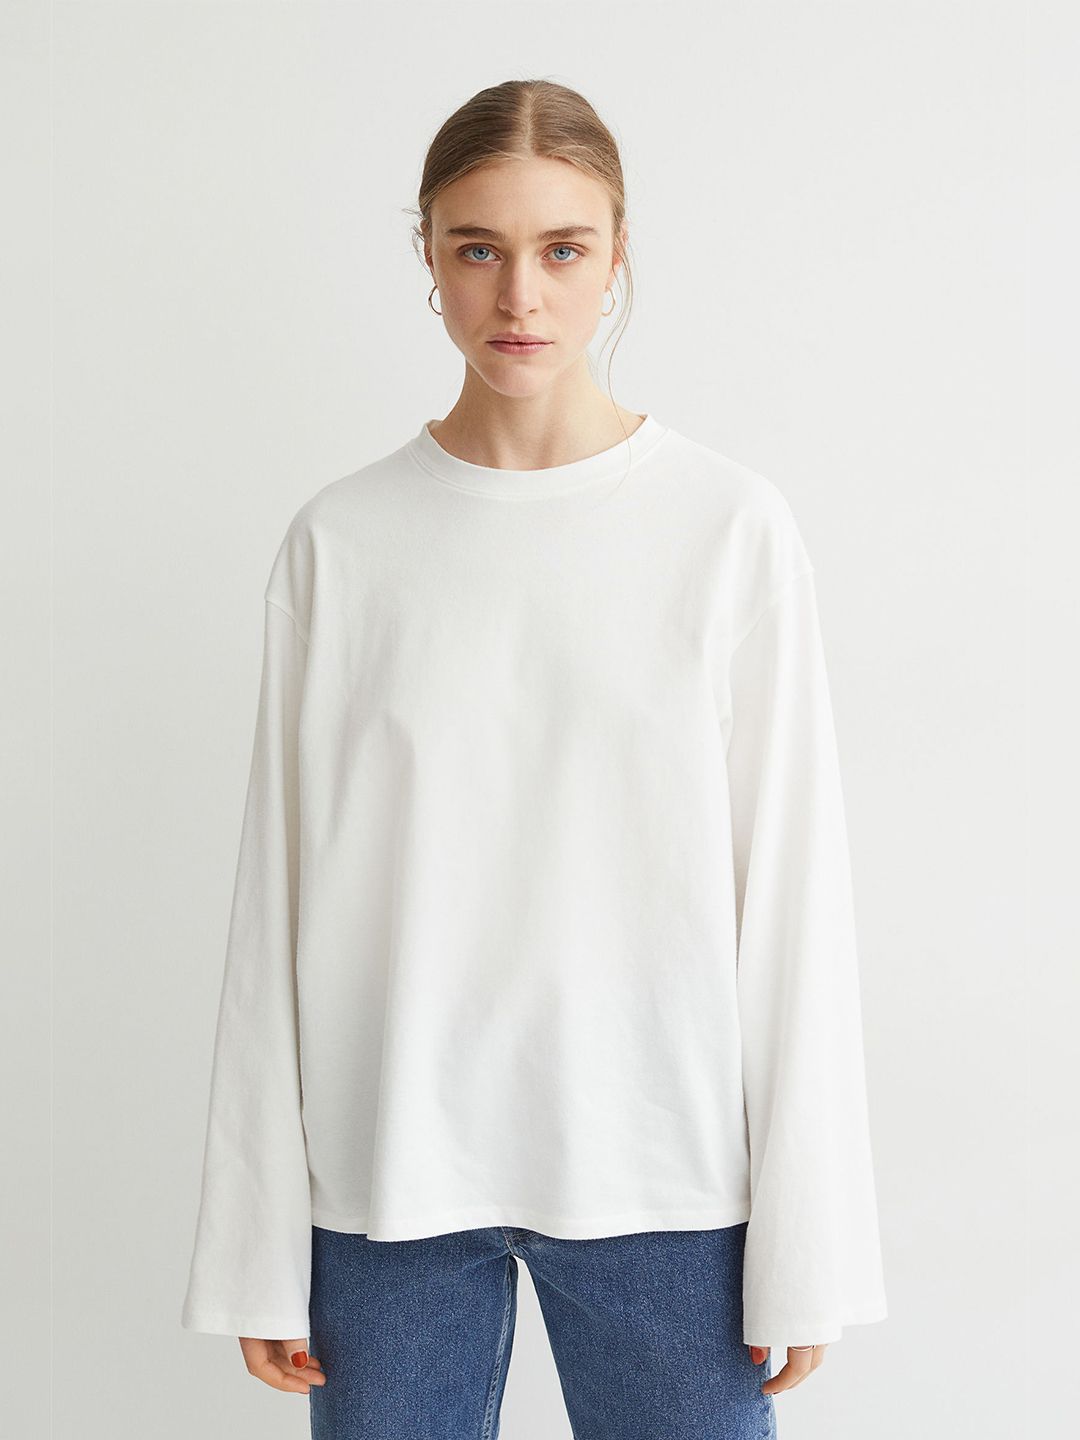 H&M Women White Solid Long-Sleeved Pure Cotton Top Price in India